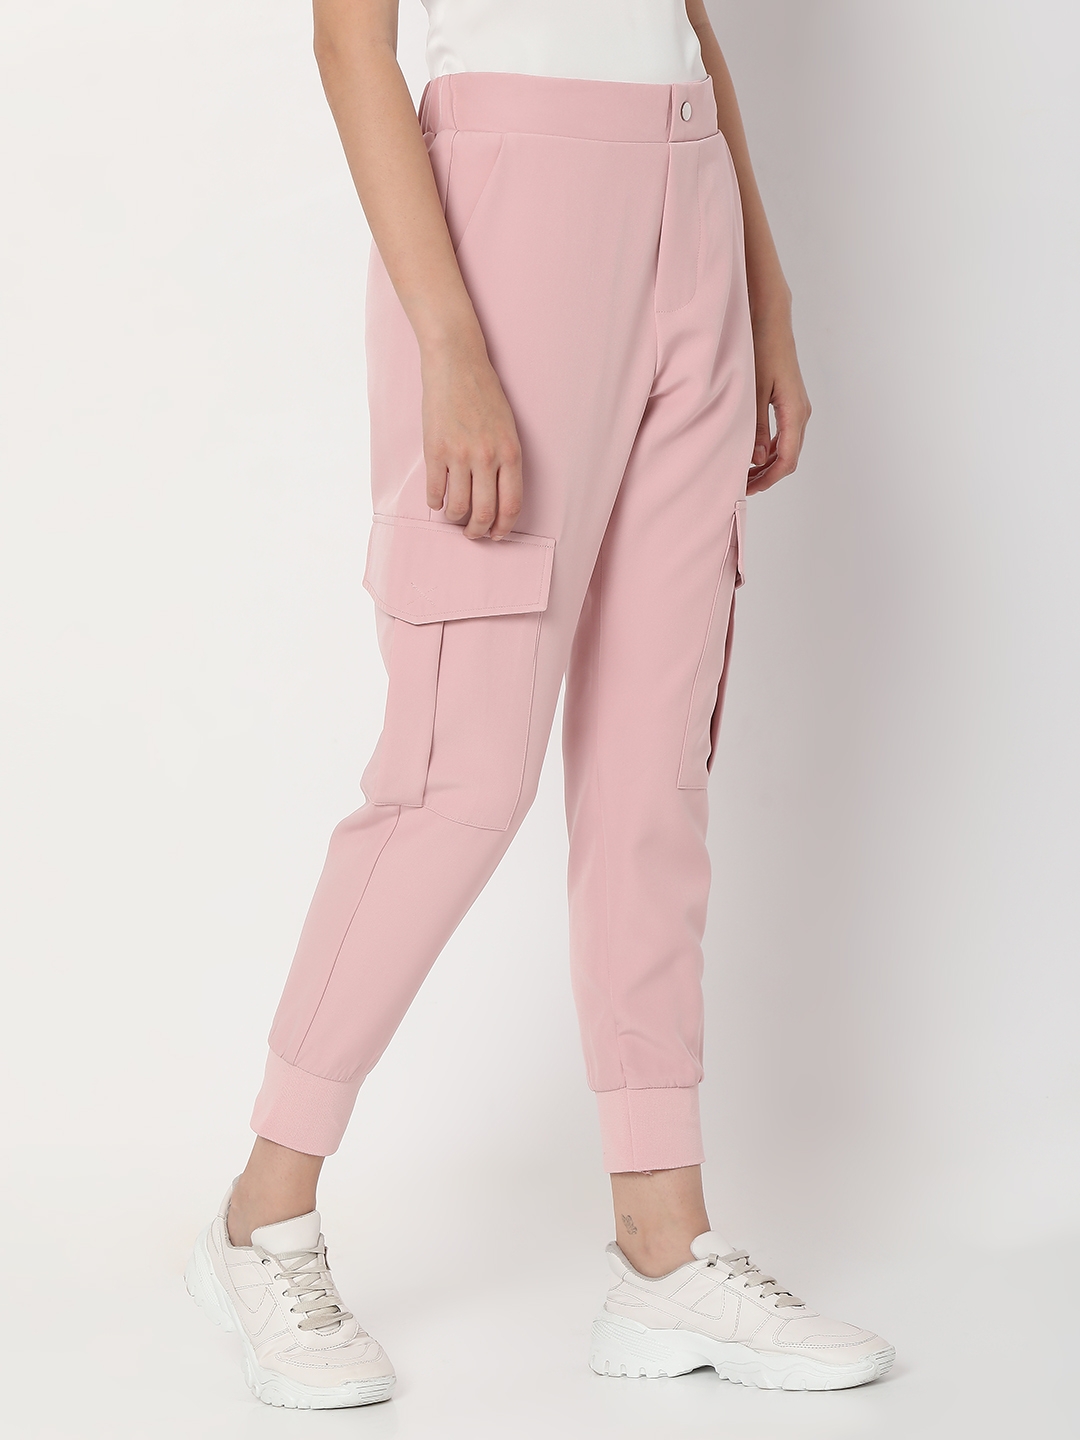 spykar | Women's Pink Cotton Solid Trackpants 2